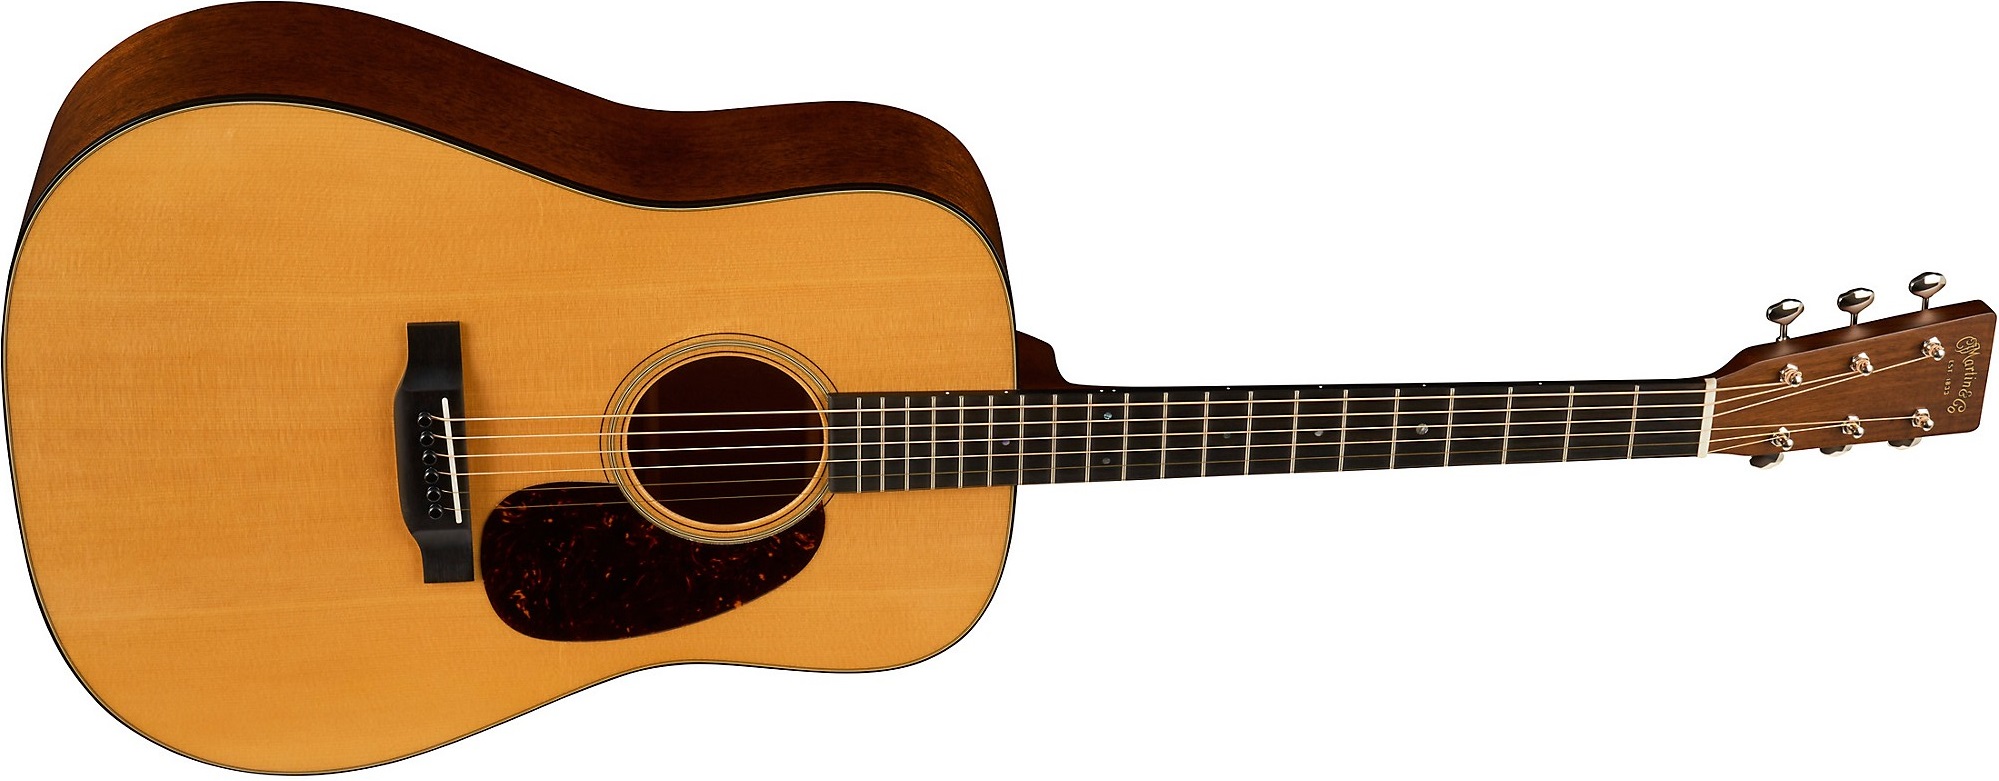 Martin D-18 Acoustic Guitar on a white background